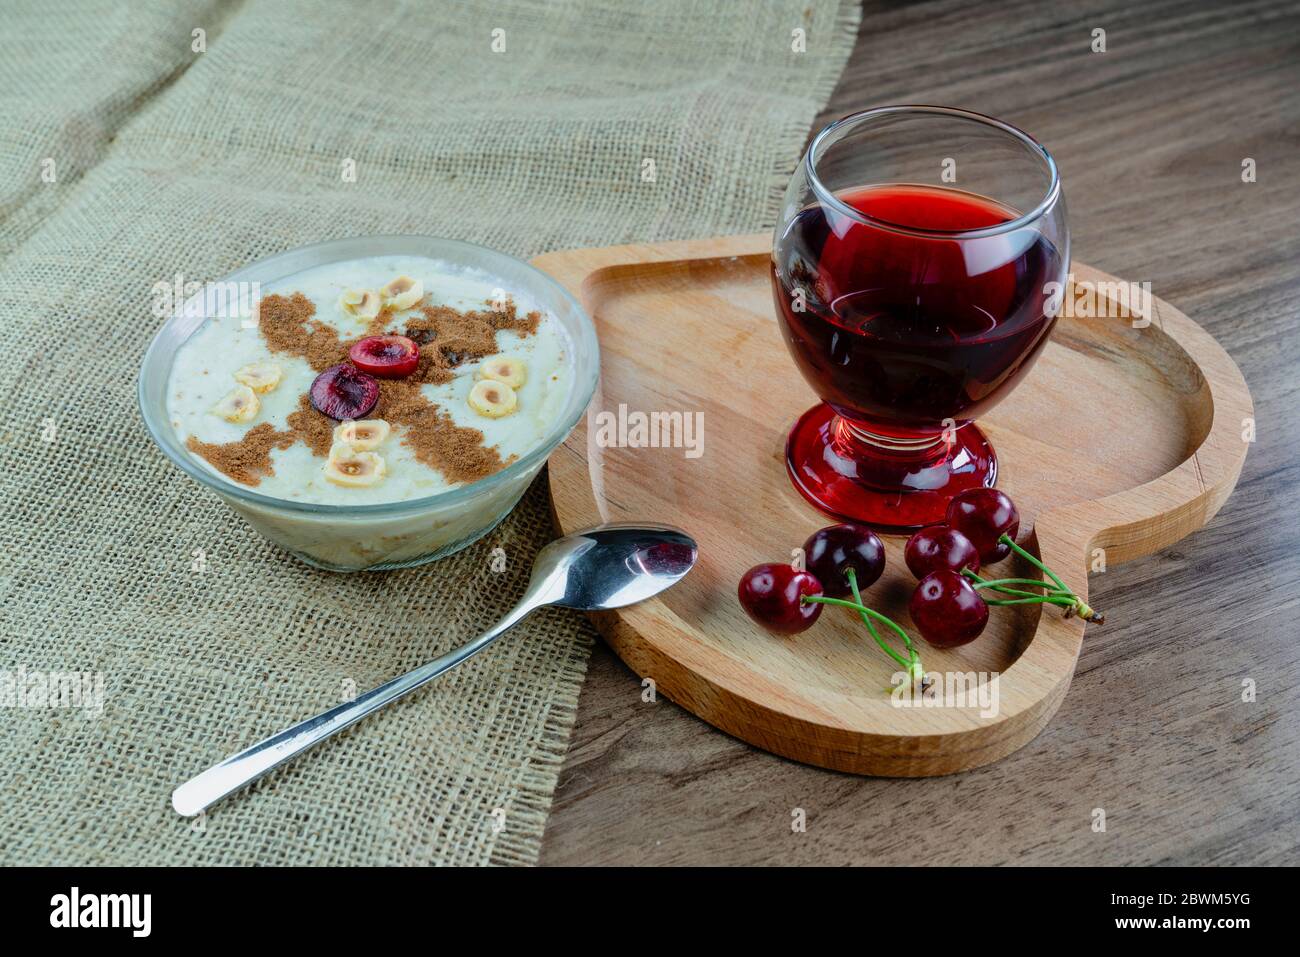 Traditional Turkish dessert, milk fermented with dried figs. 'Fig sleep' is a local sweet obtained by the fermentation of dried figs milk. Serving des Stock Photo